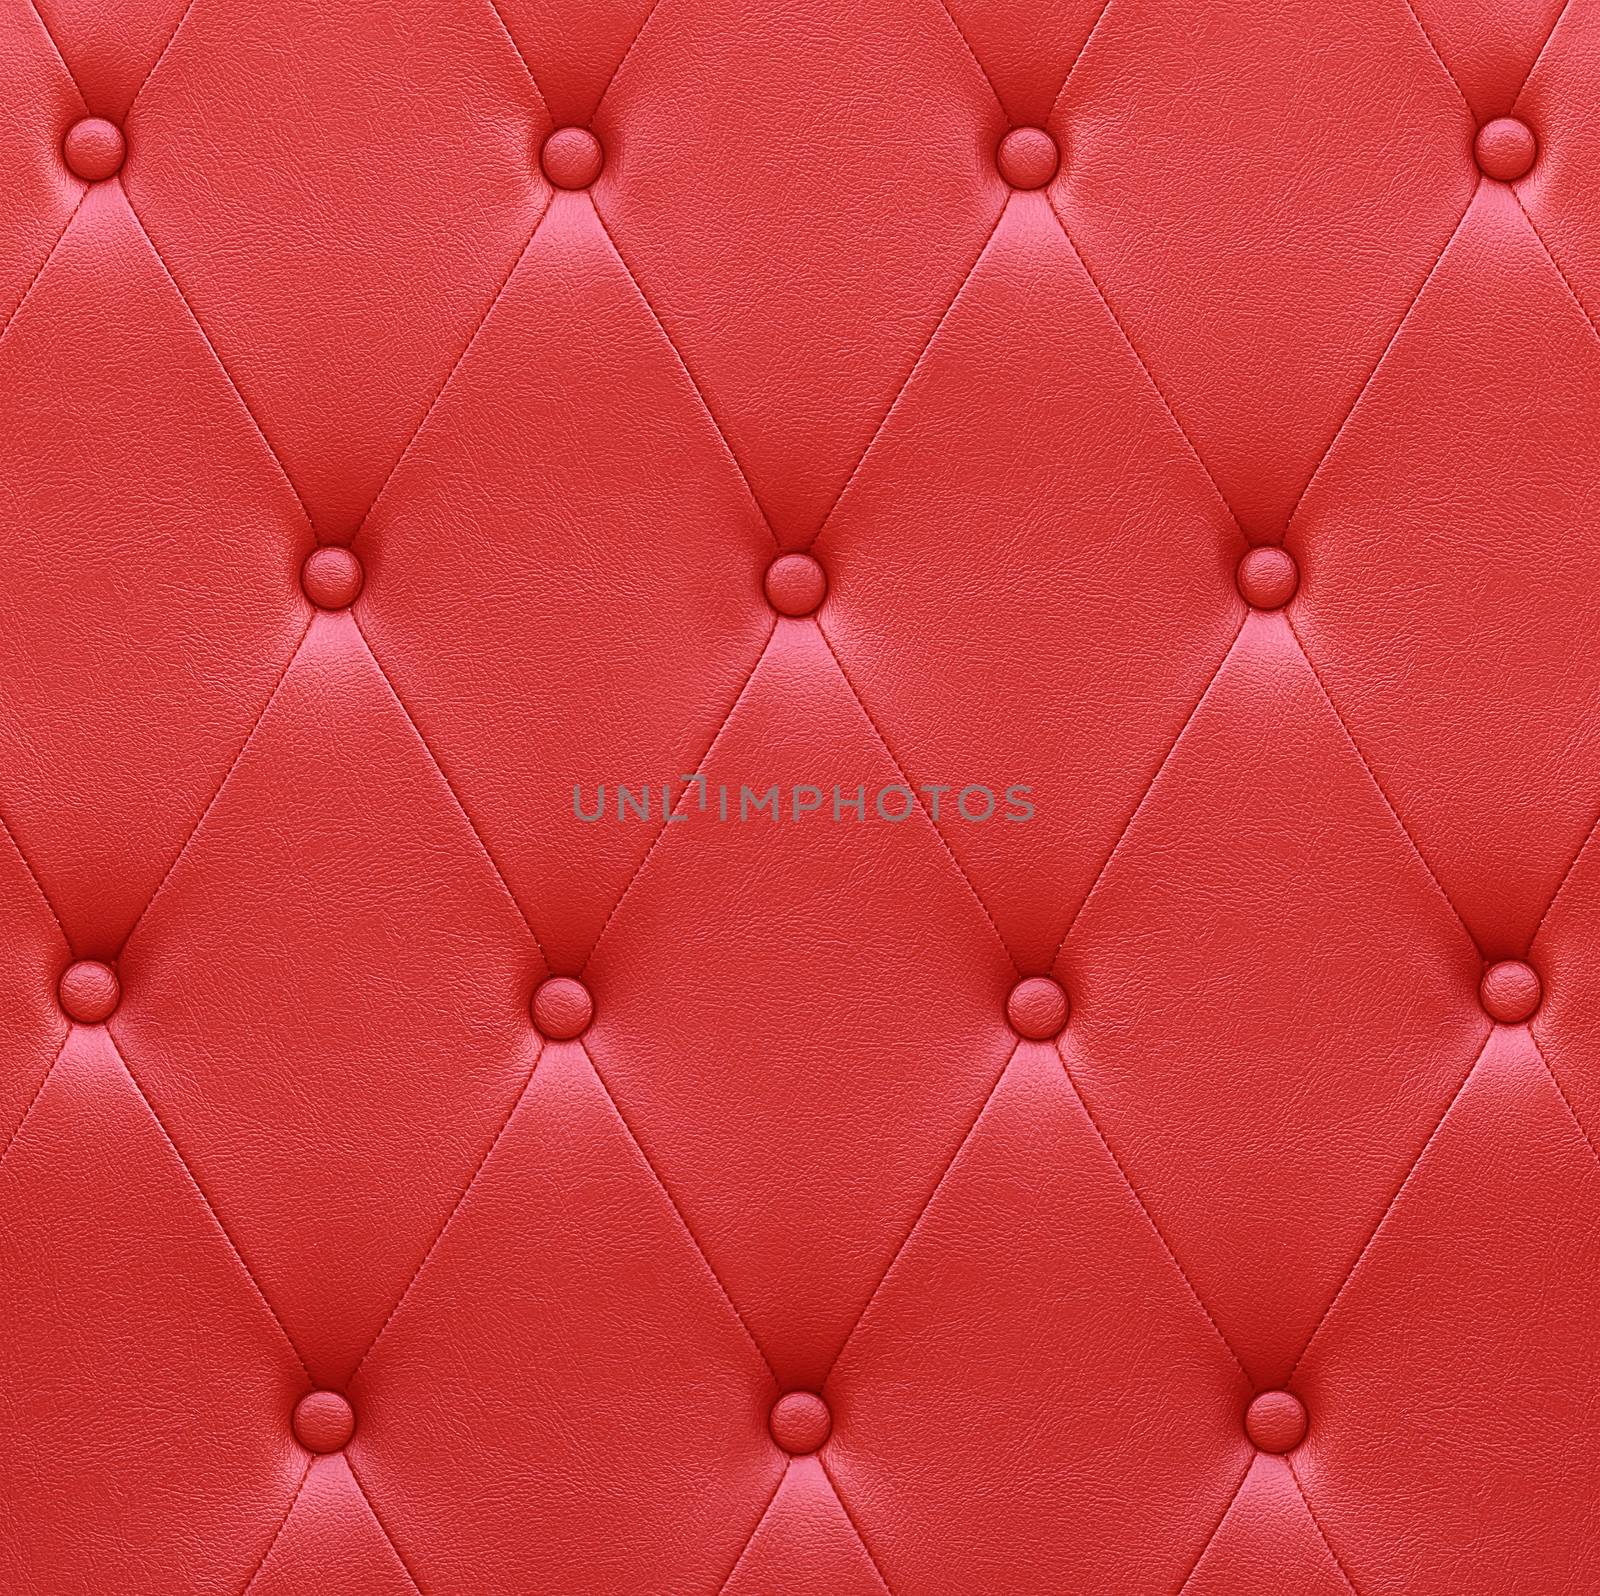 Luxurious red leather seat upholstery use for background